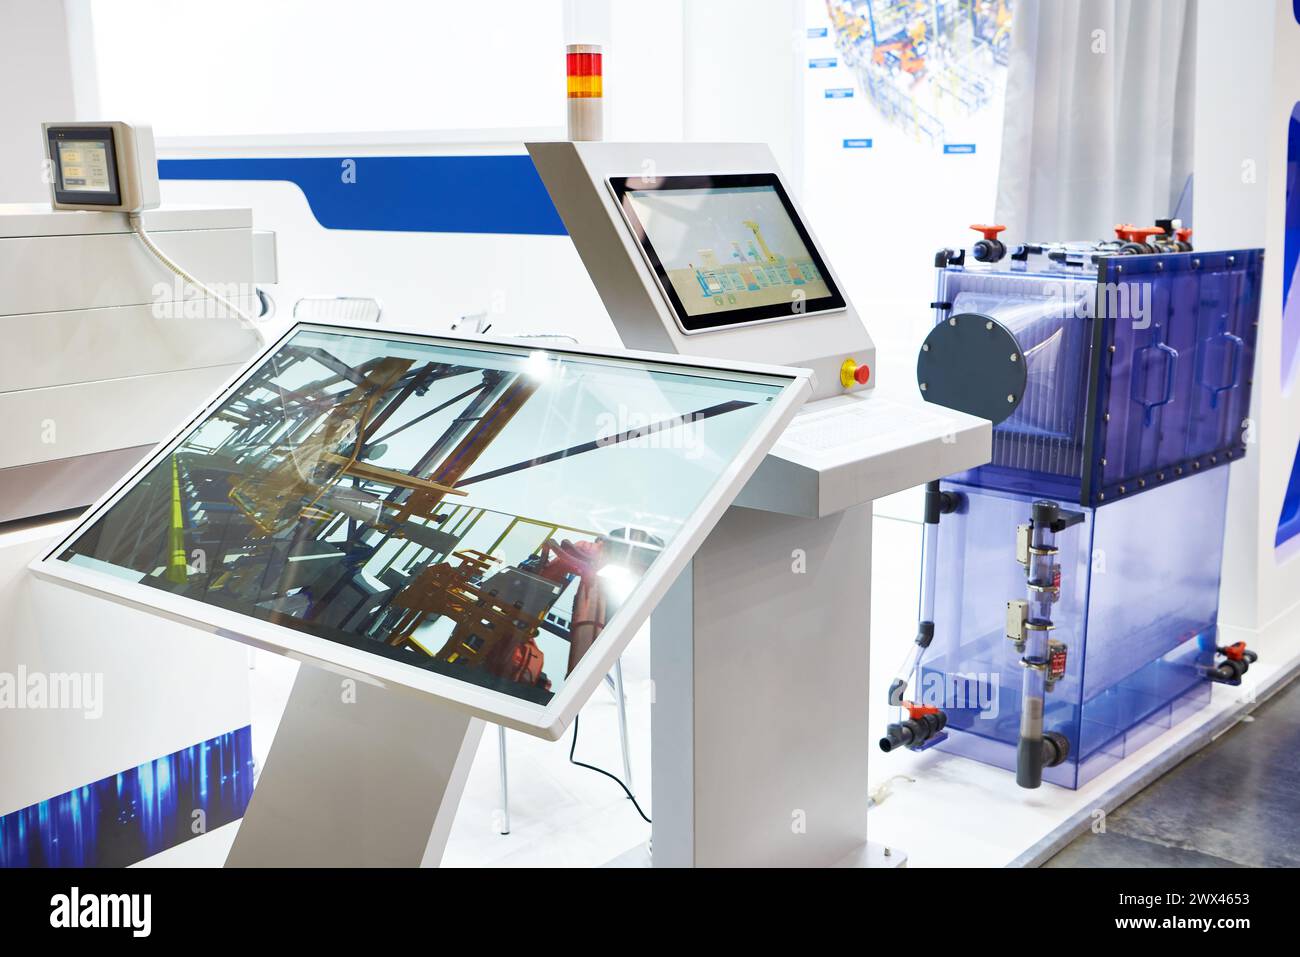 Electronic presentation and monitoring technologies at an industrial exhibition Stock Photo